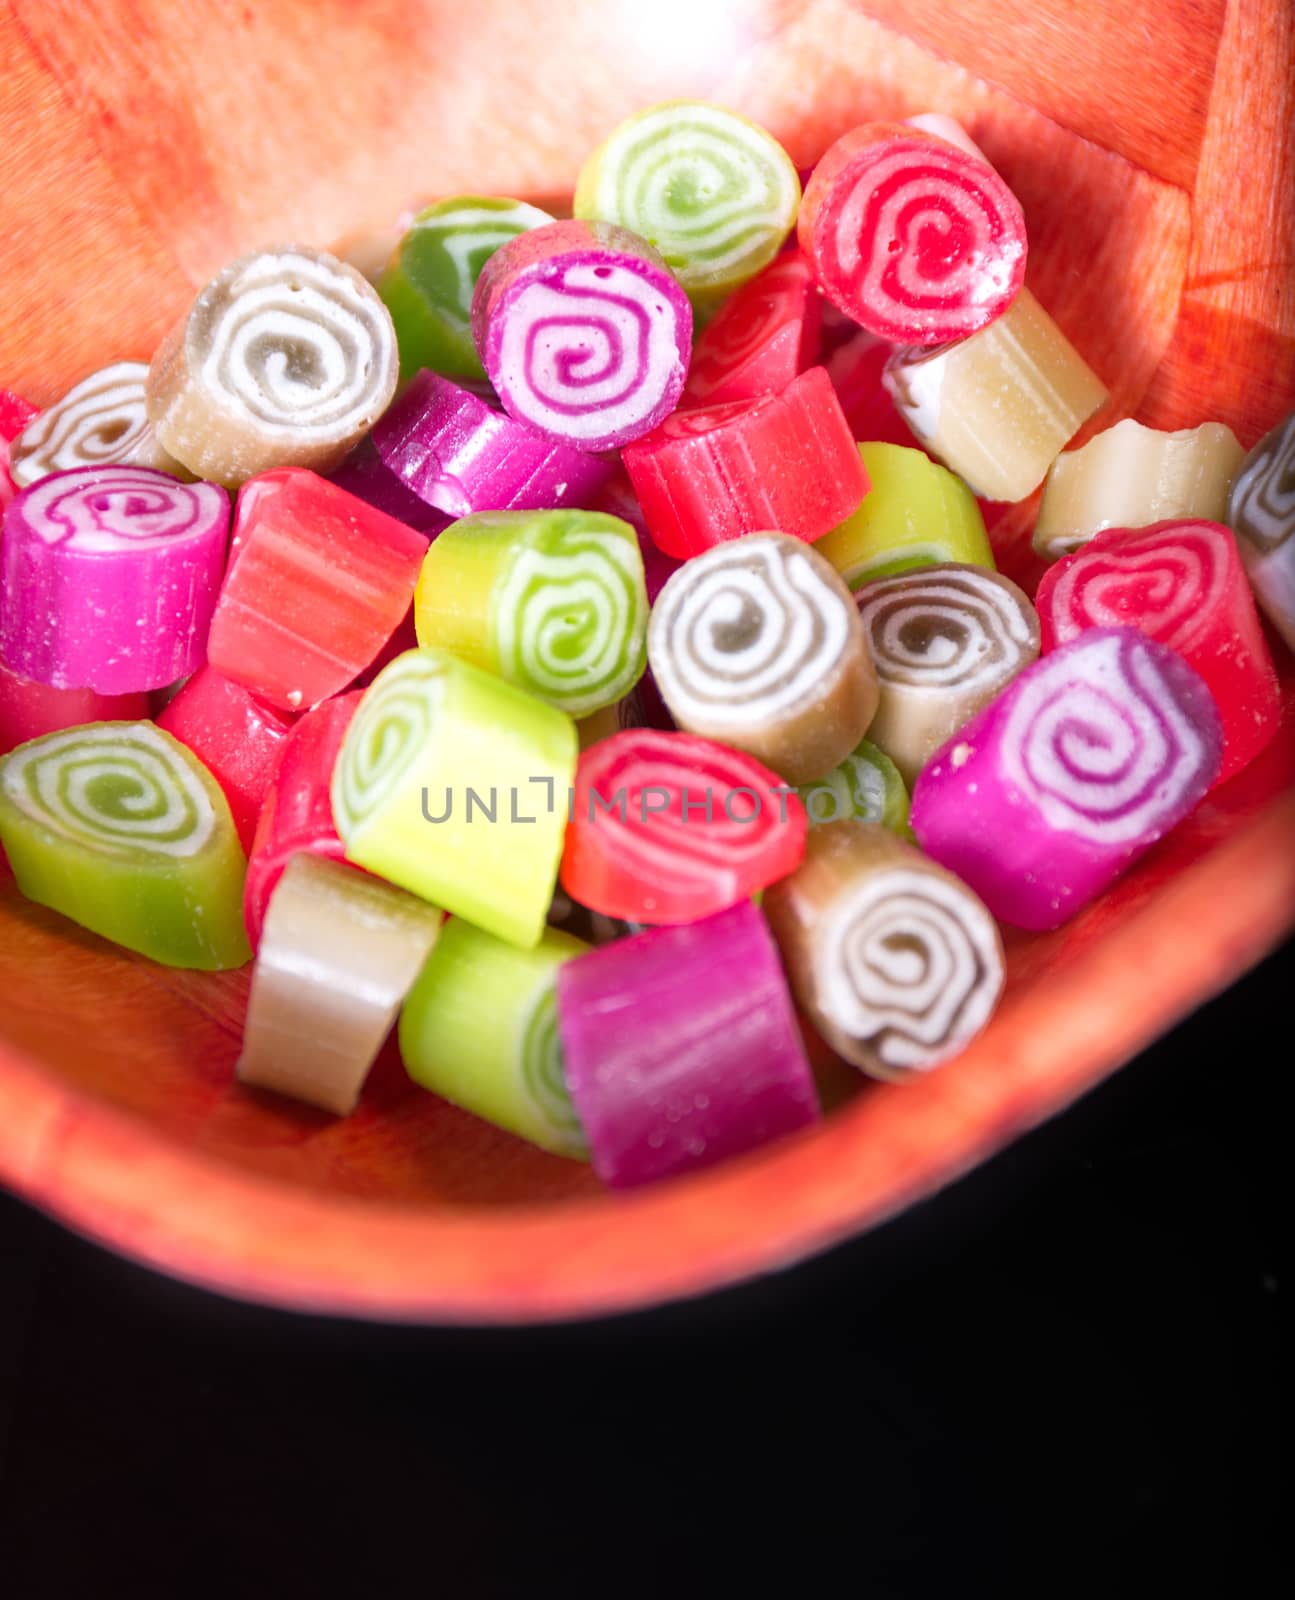 Colorful candies on black background